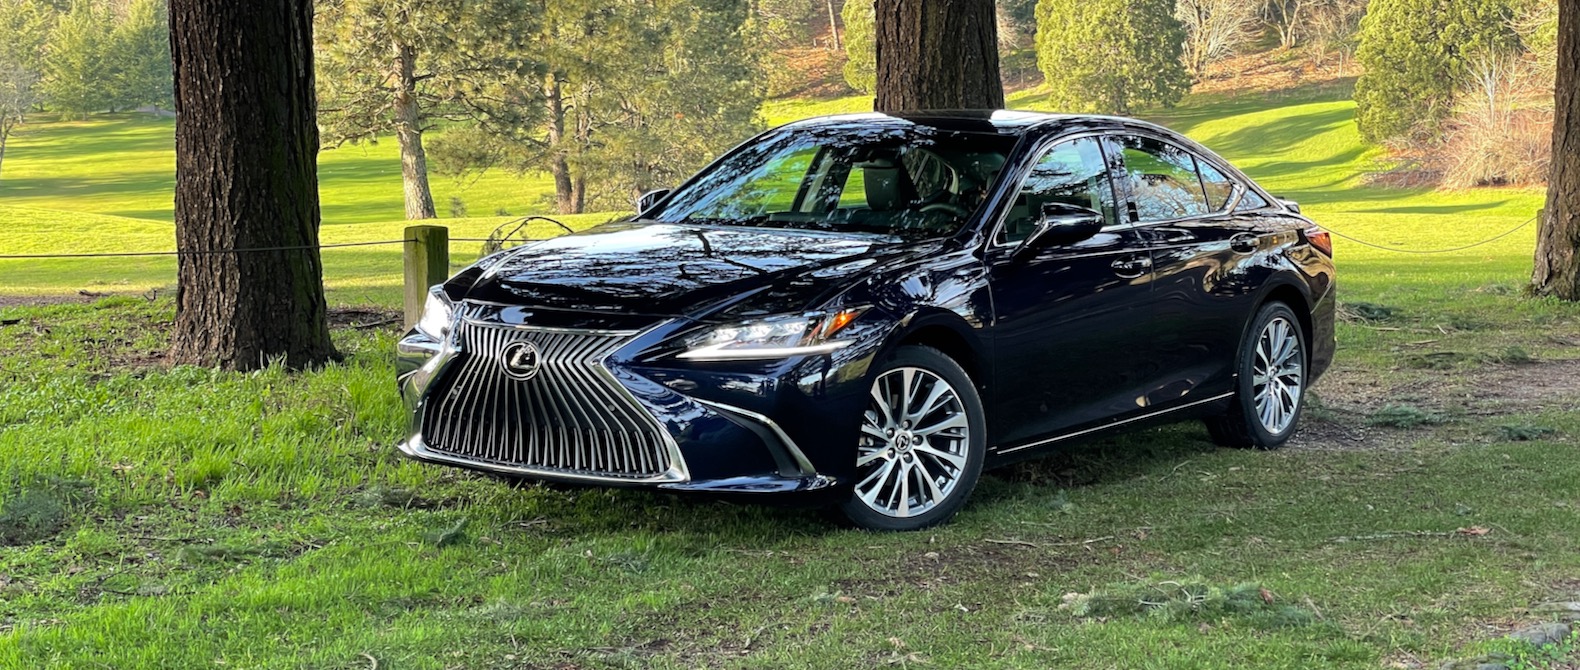 2021 Lexus ES 250 Review: The sure footed street cruiser - The Torque Report